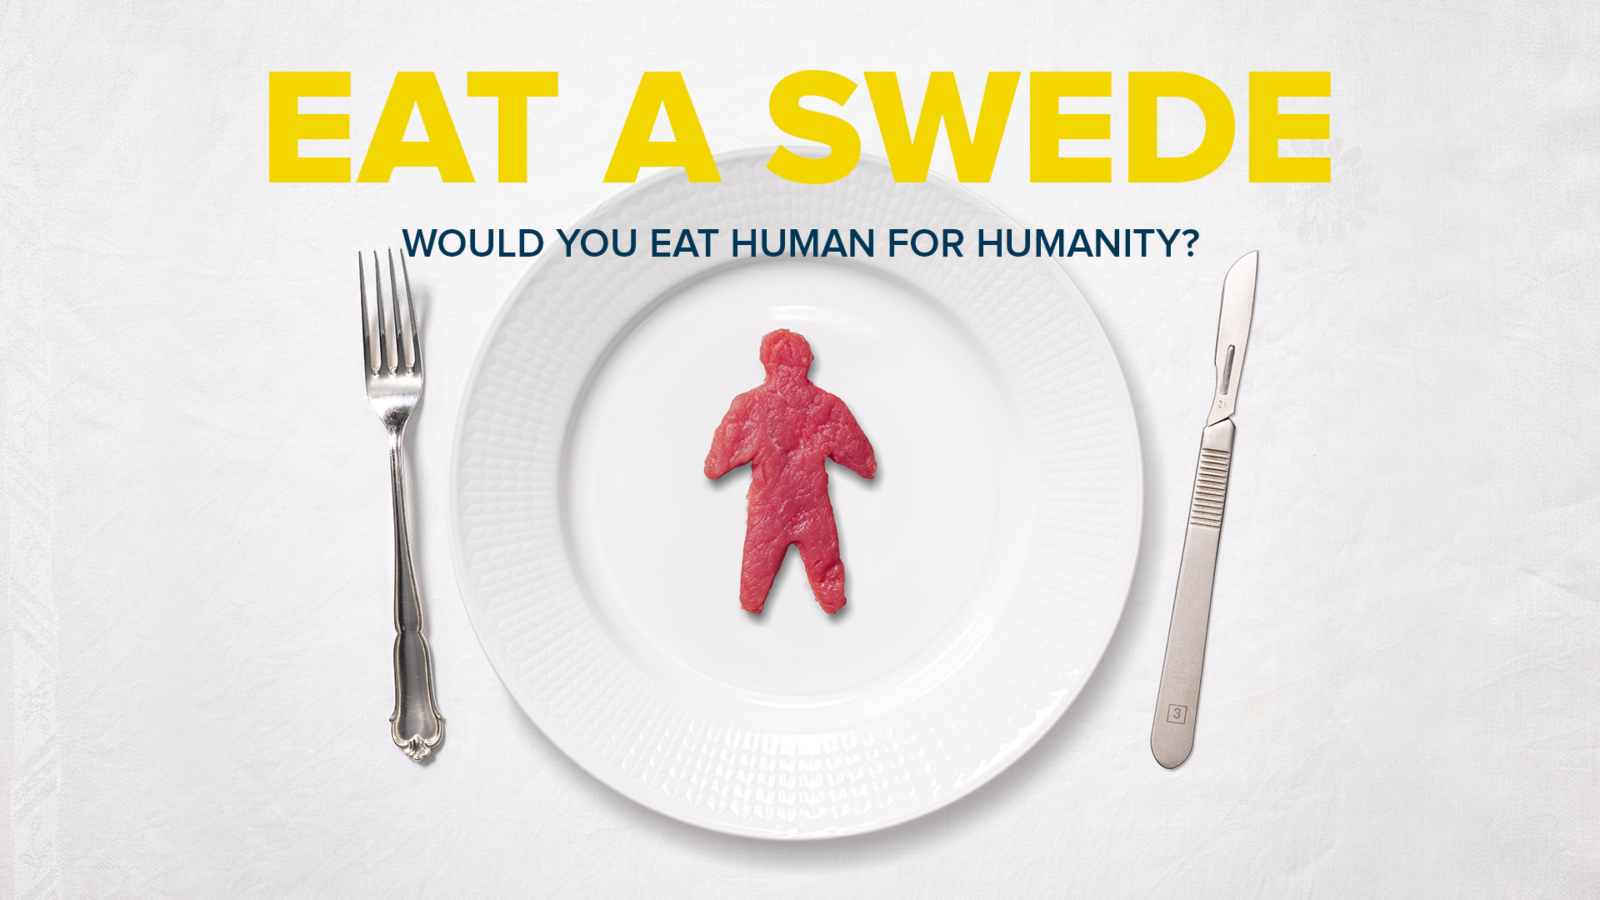 ‘Eat a Swede’: the limit of lab meat